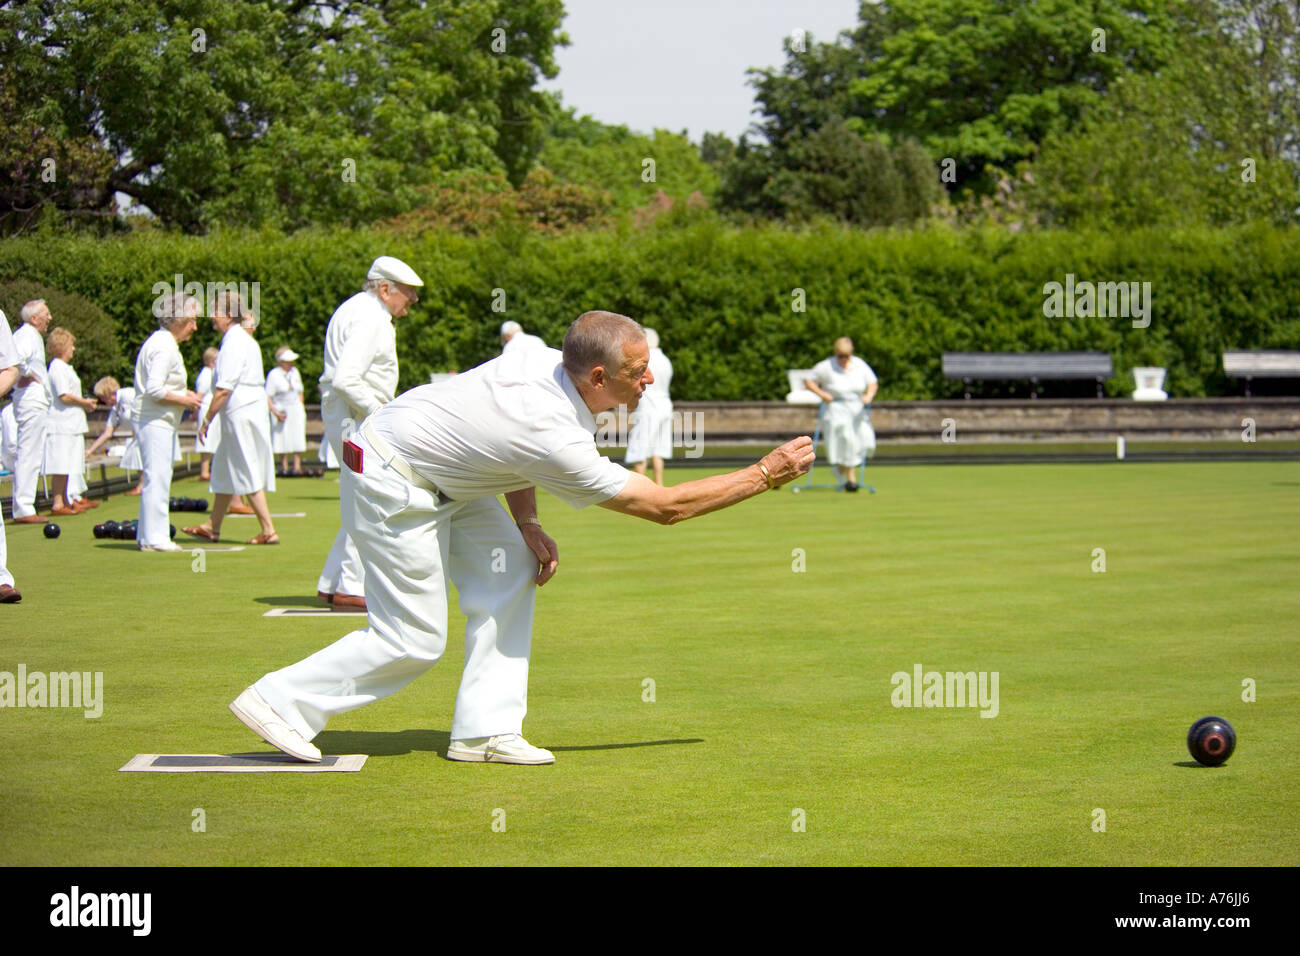 A view of the green with a male team member as he bowls. Stock Photo